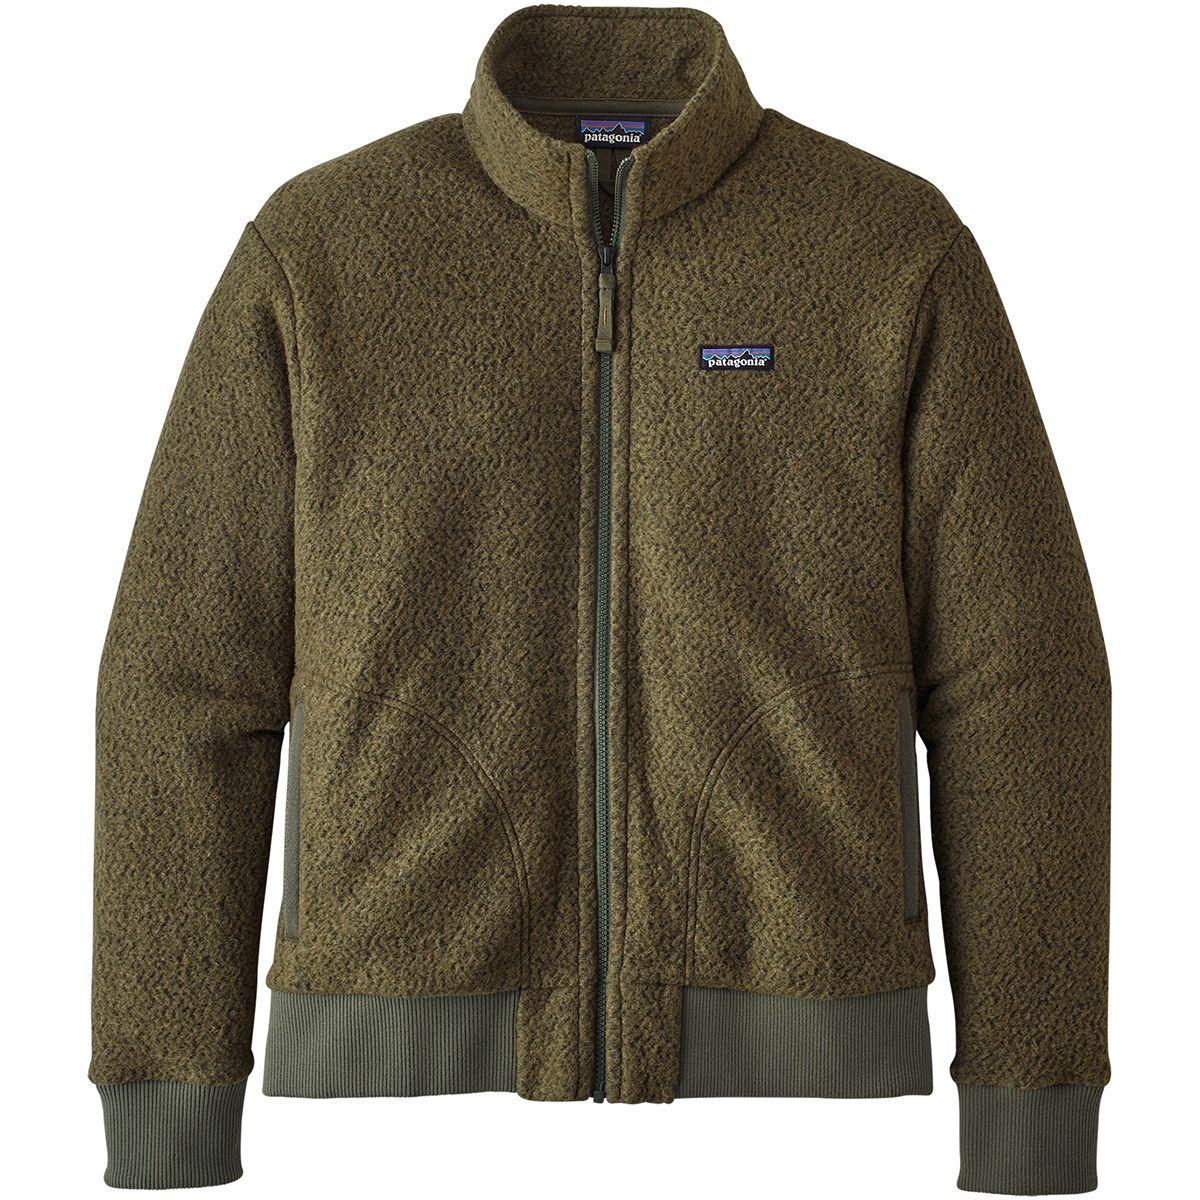 Patagonia Woolyester Fleece Jacket in Green for Men - Lyst